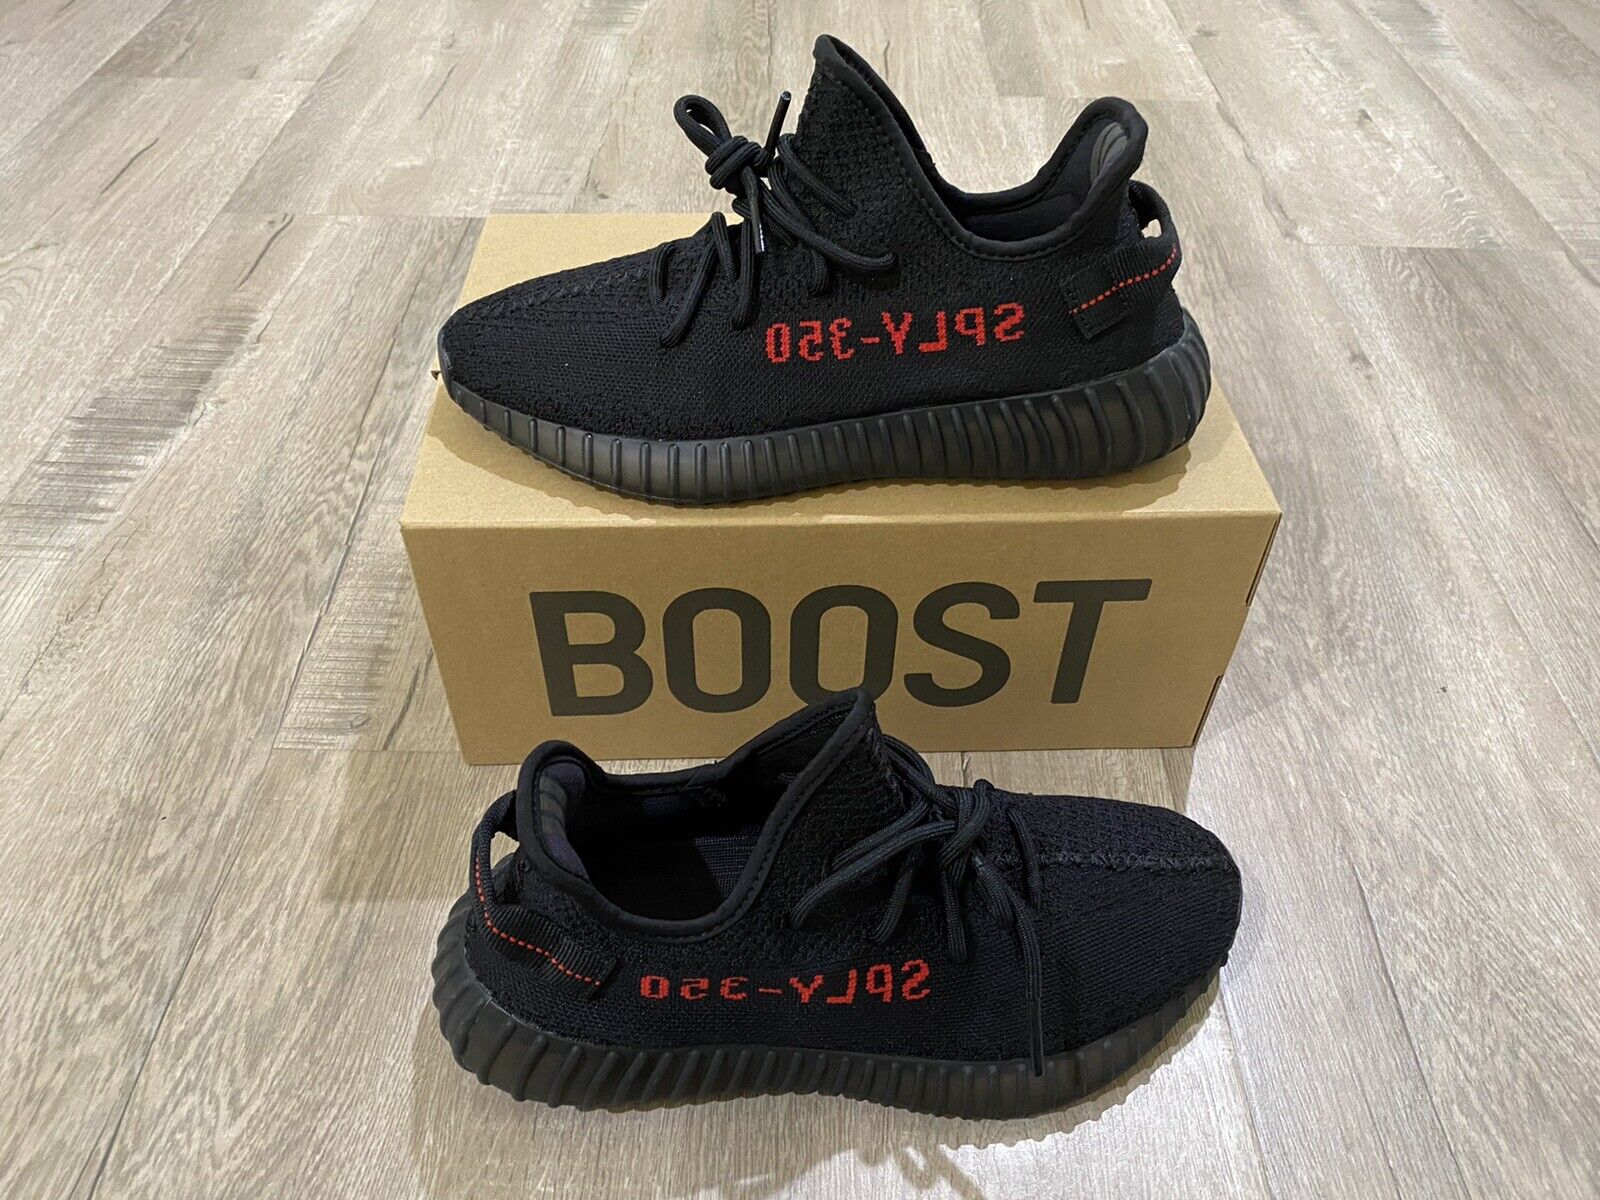 New Adidas Yeezy Boost 350 V2 Bred Size 8.5 Black Red In Hand! Ships Fast | eBay